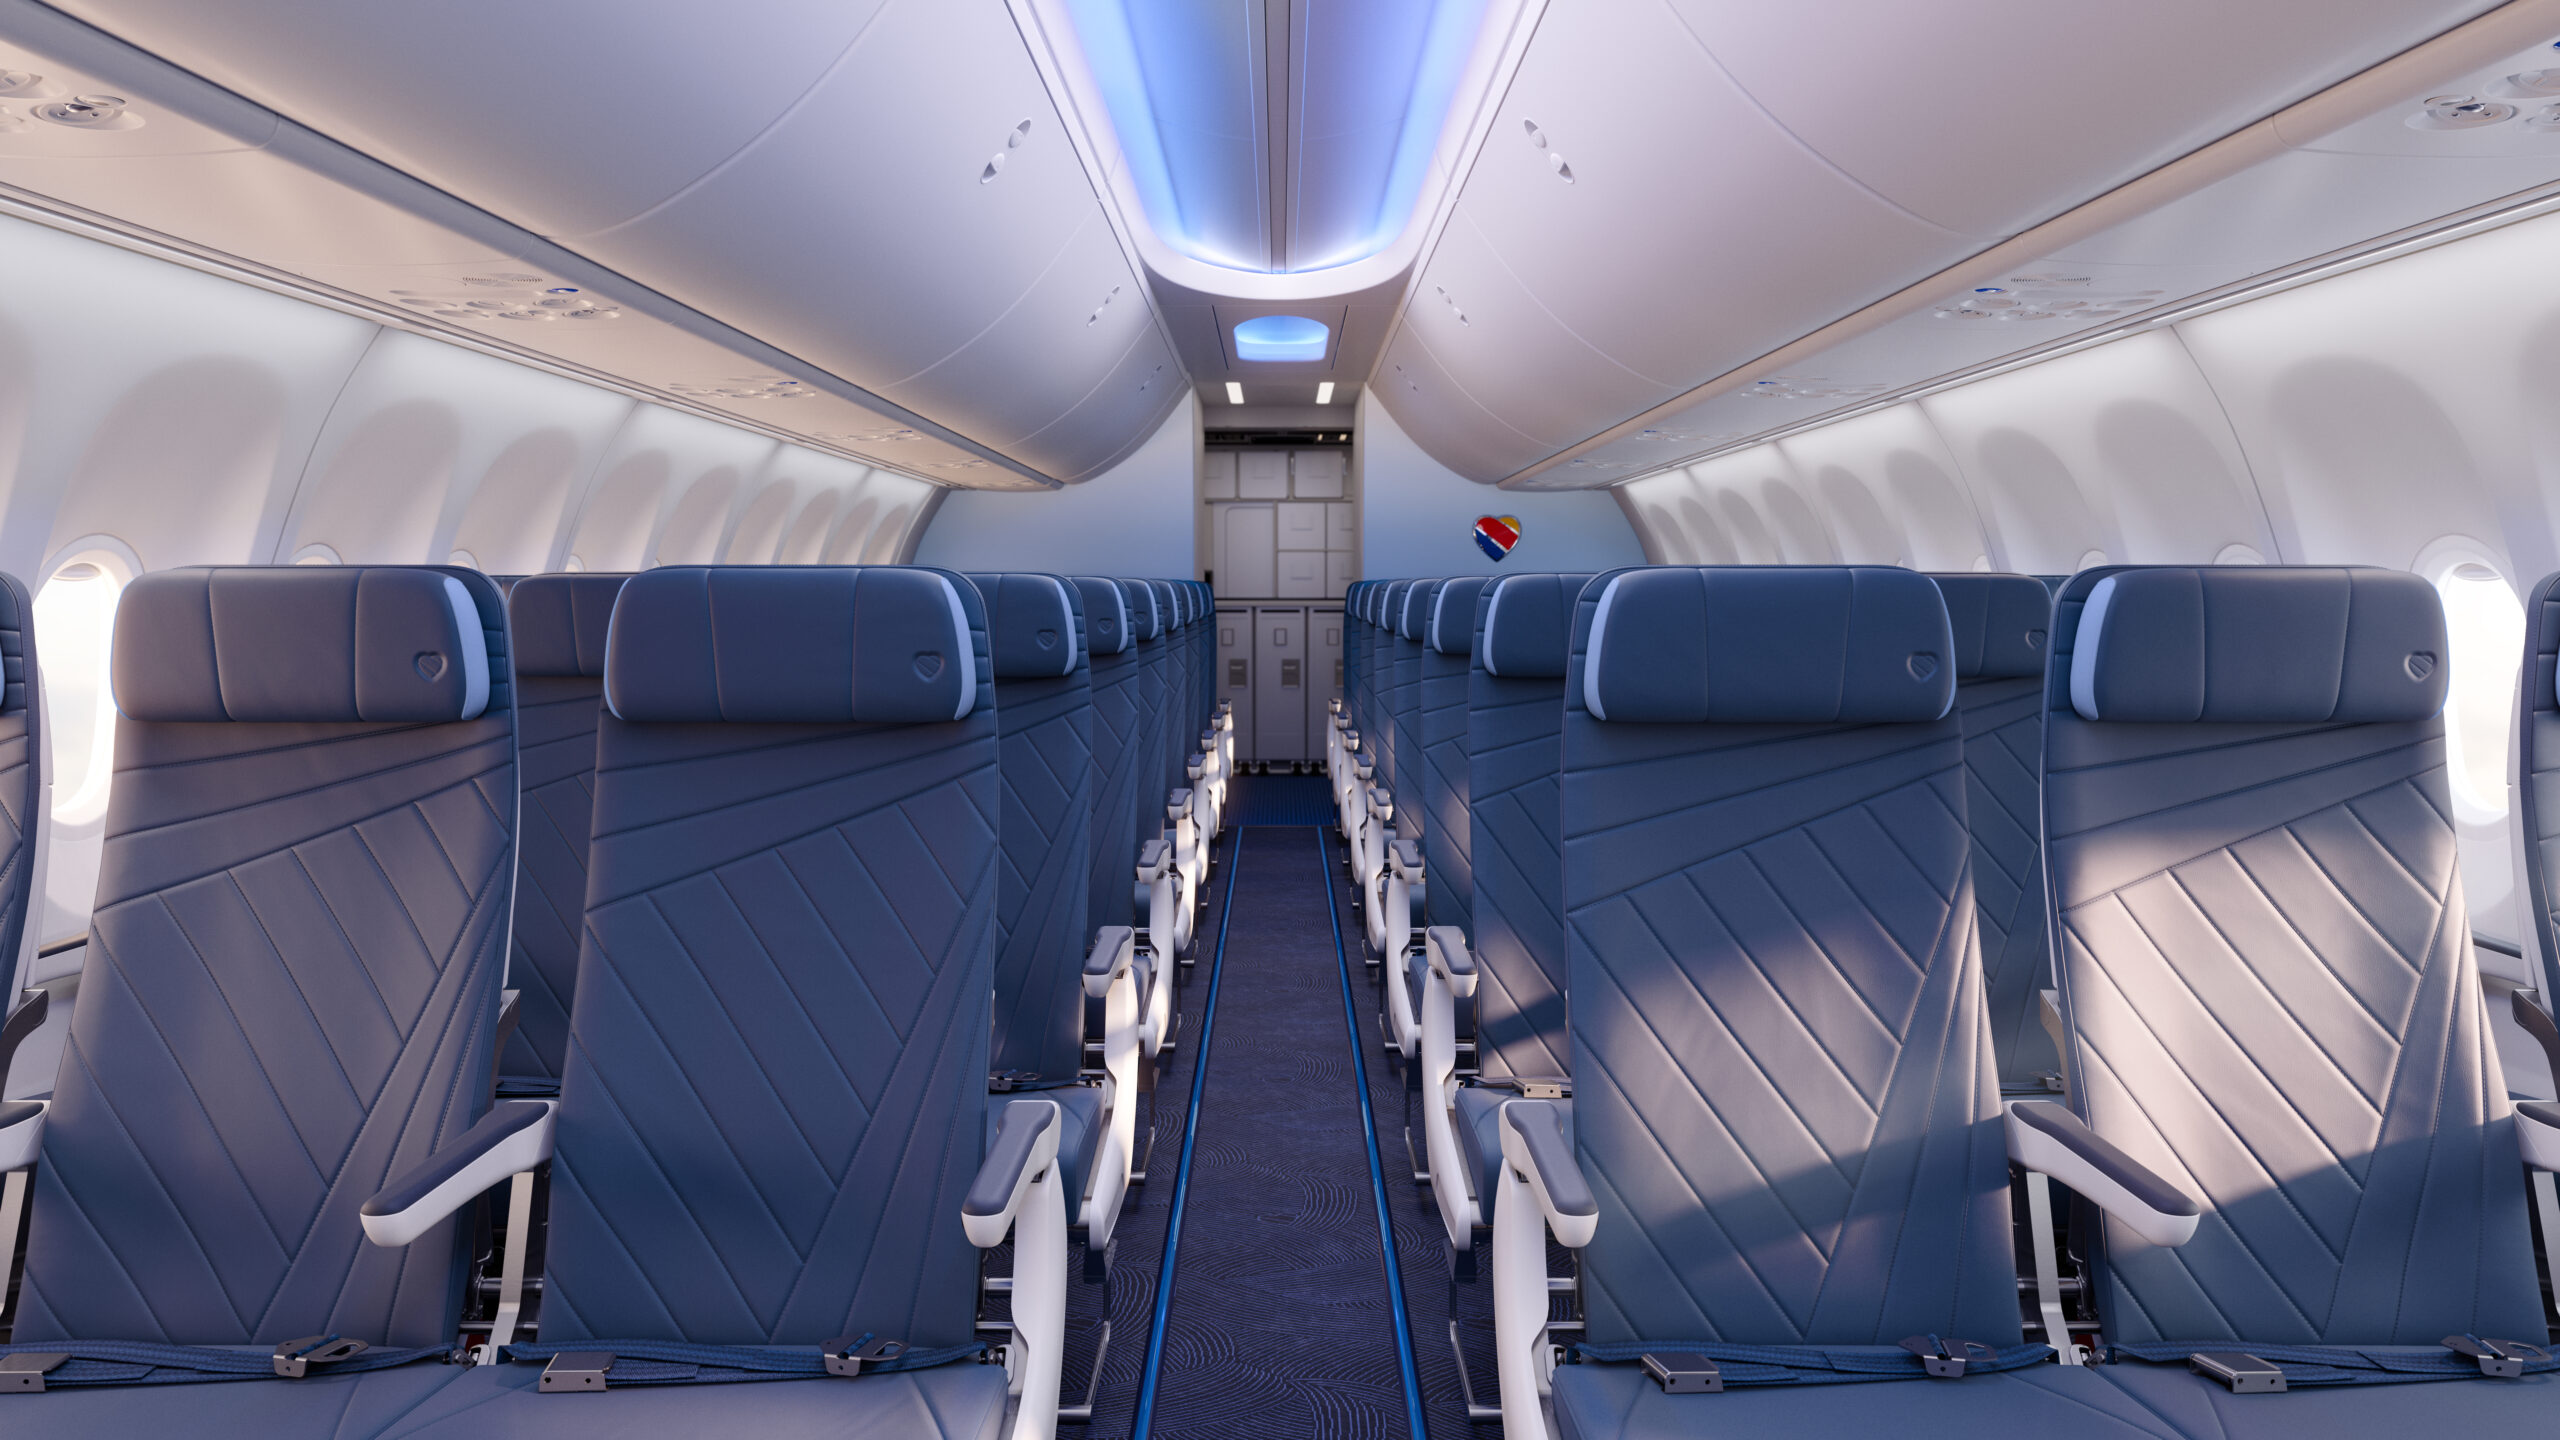 Photo of: Southwest Airlines RECARO Seat Rendering // Southwest Airlines